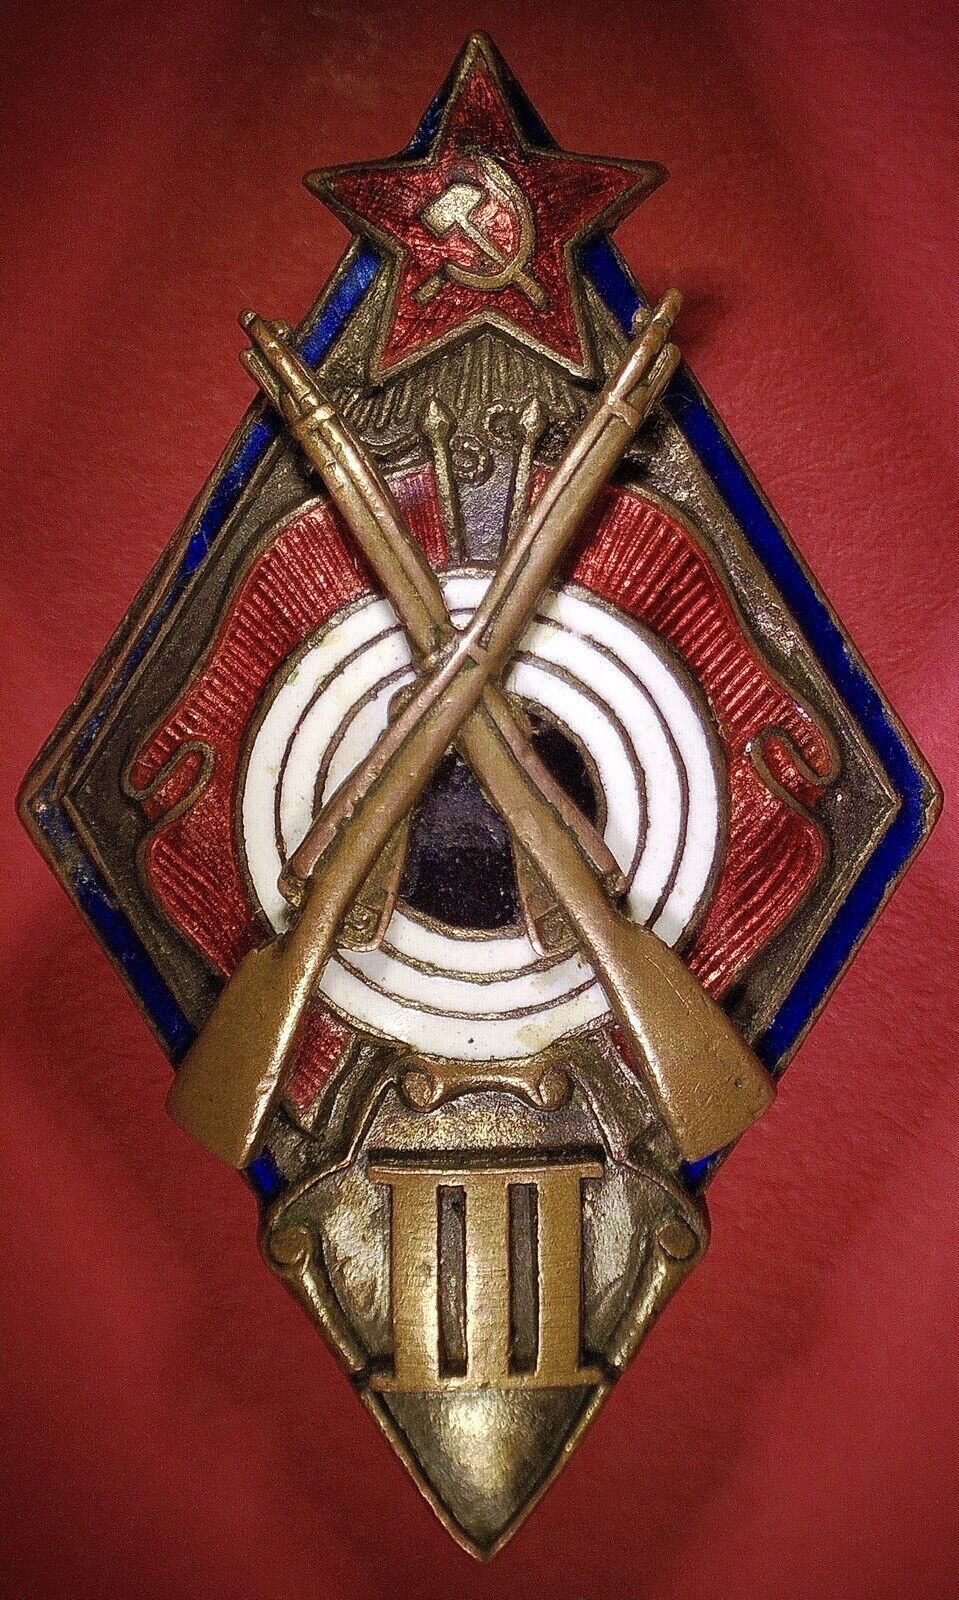 OGPU Rifle Marksmanship Qualification Badge, 3rd Class (Late 1920s-Early 1930s)